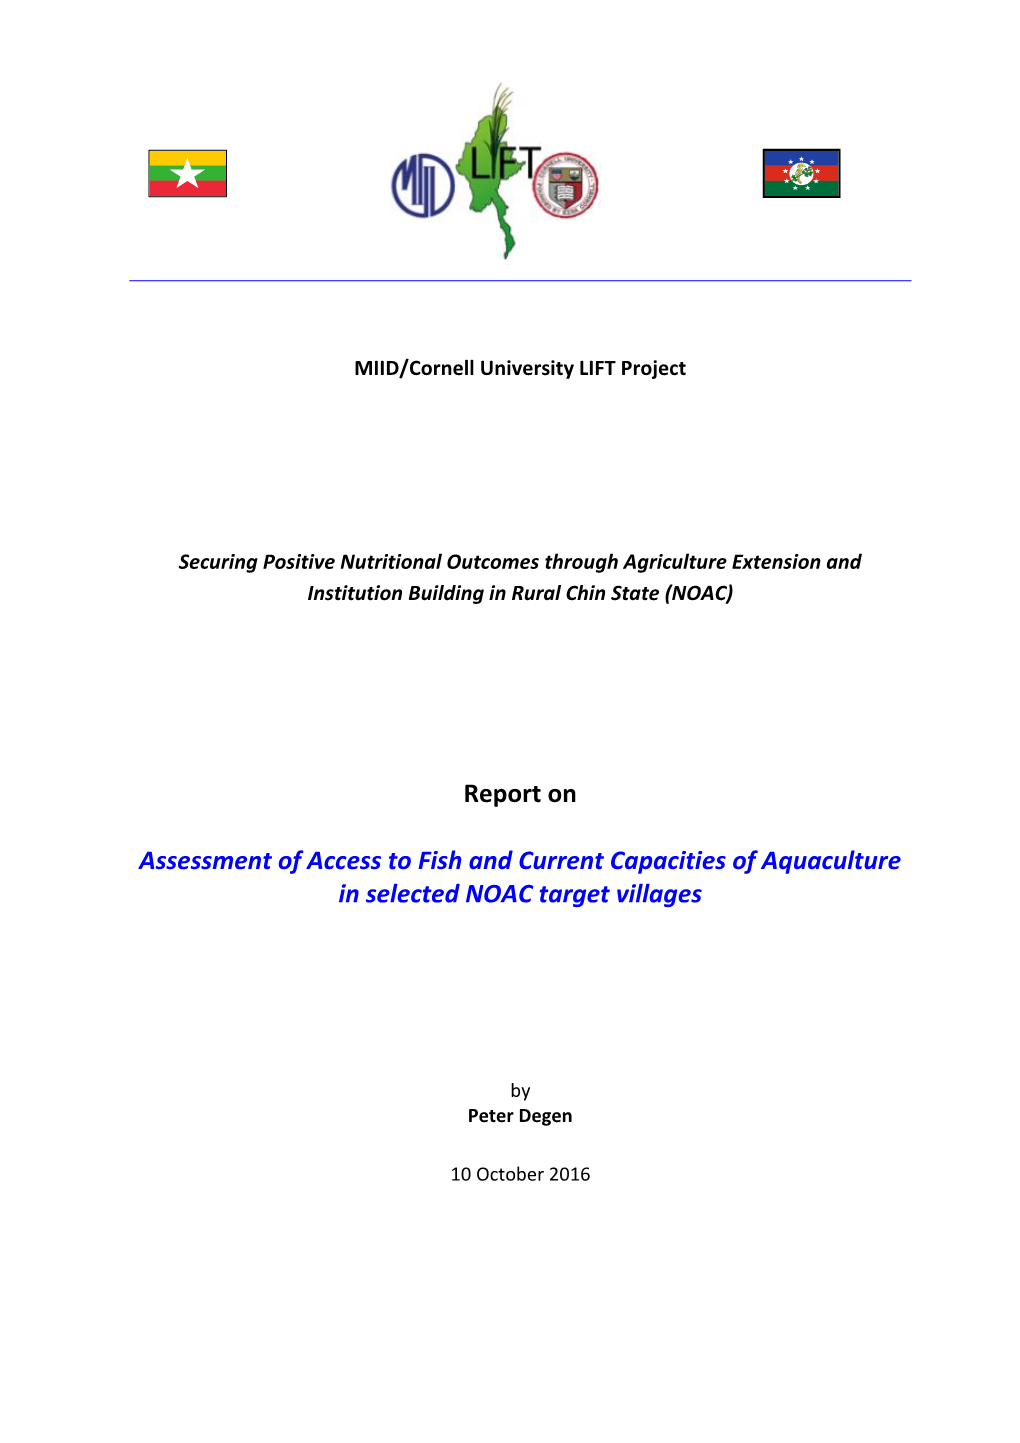 Report on Assessment of Access to Fish and Current Capacities Of